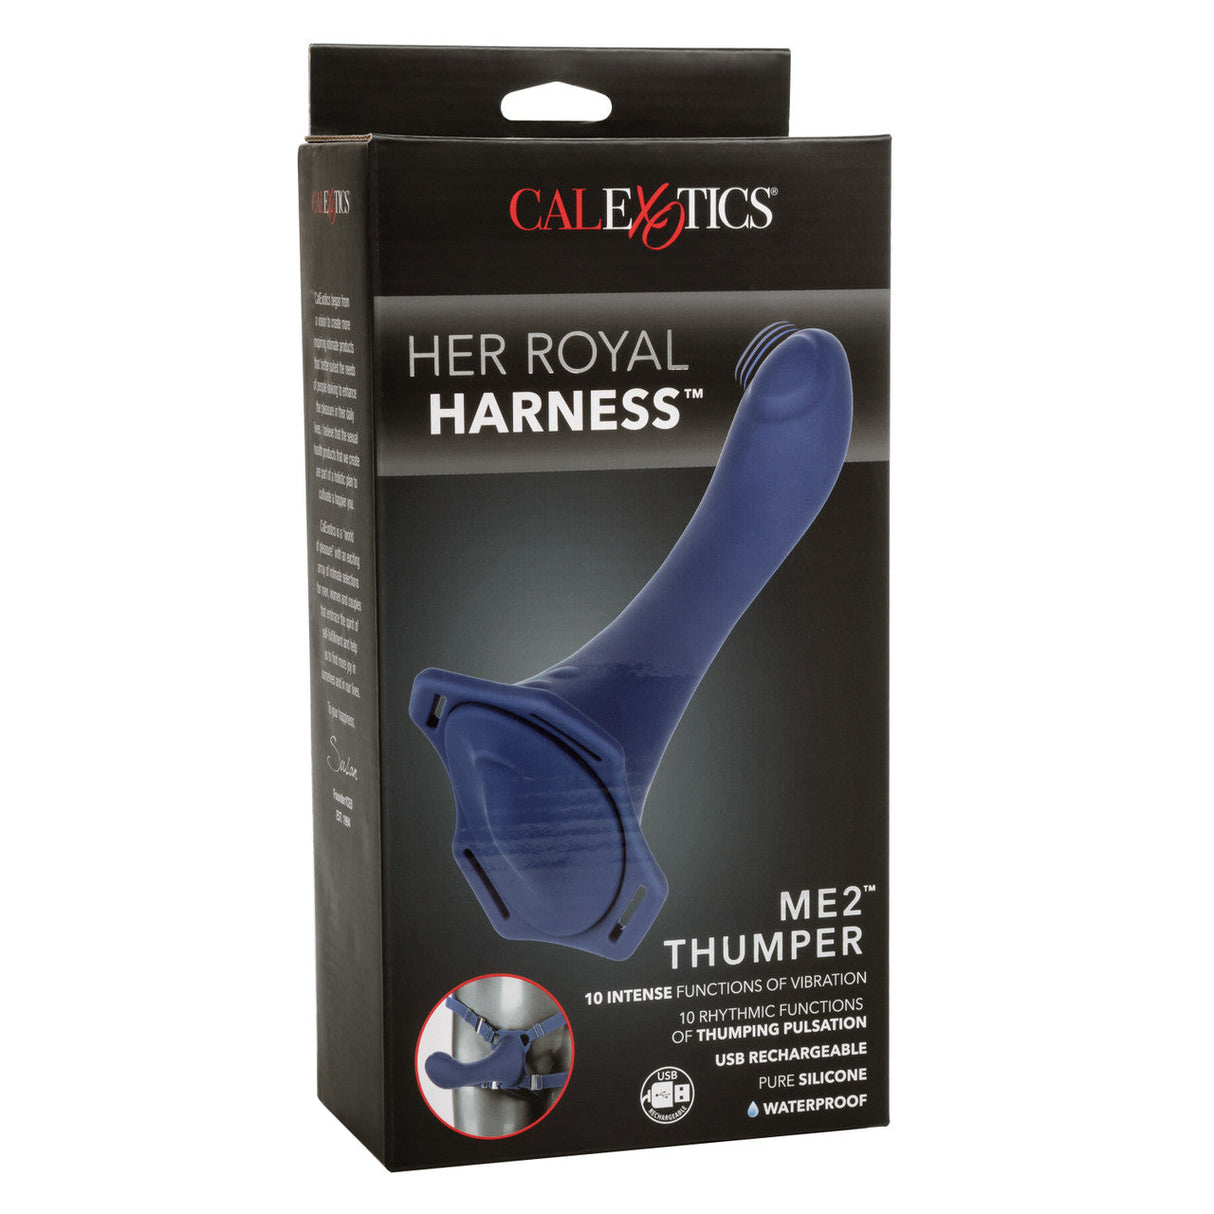 Her Royal Harness ME2 Thumper Set with Vibrating Probe